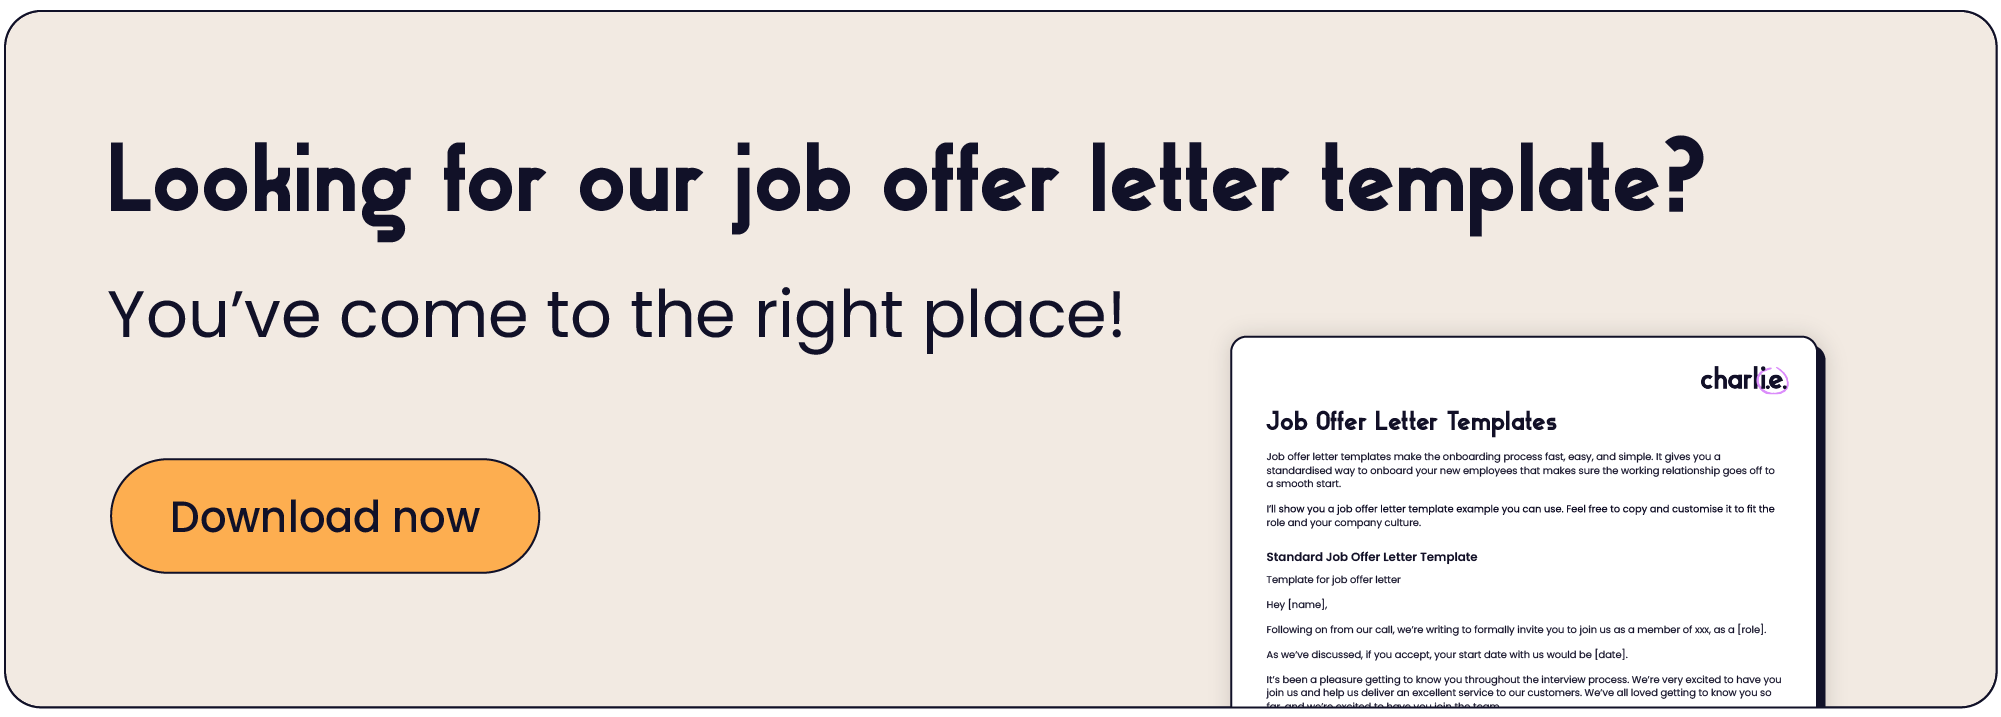 Download our job offer letter template